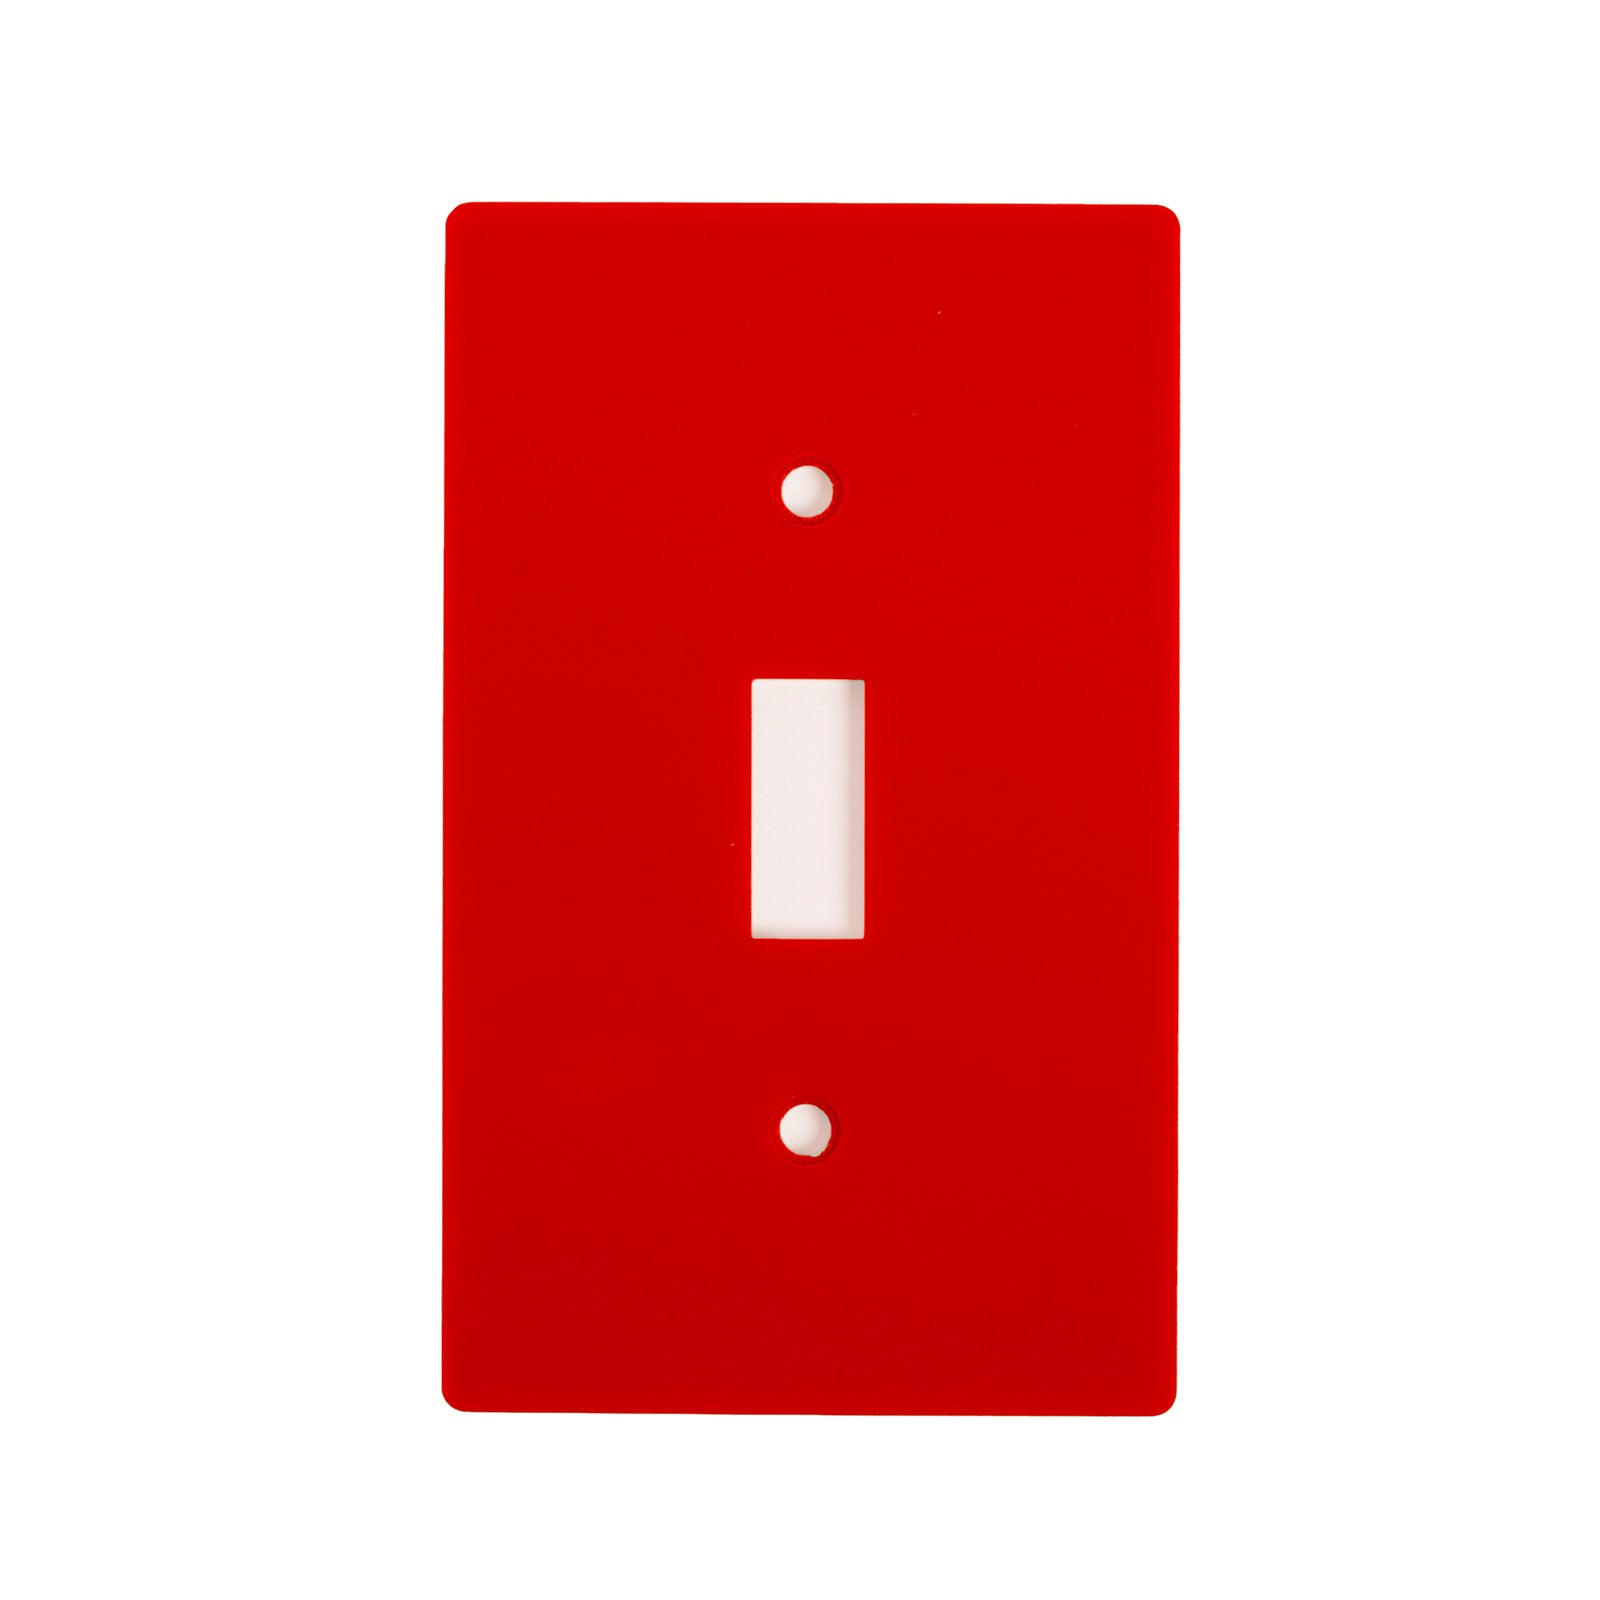 Standard Light Switch Cover